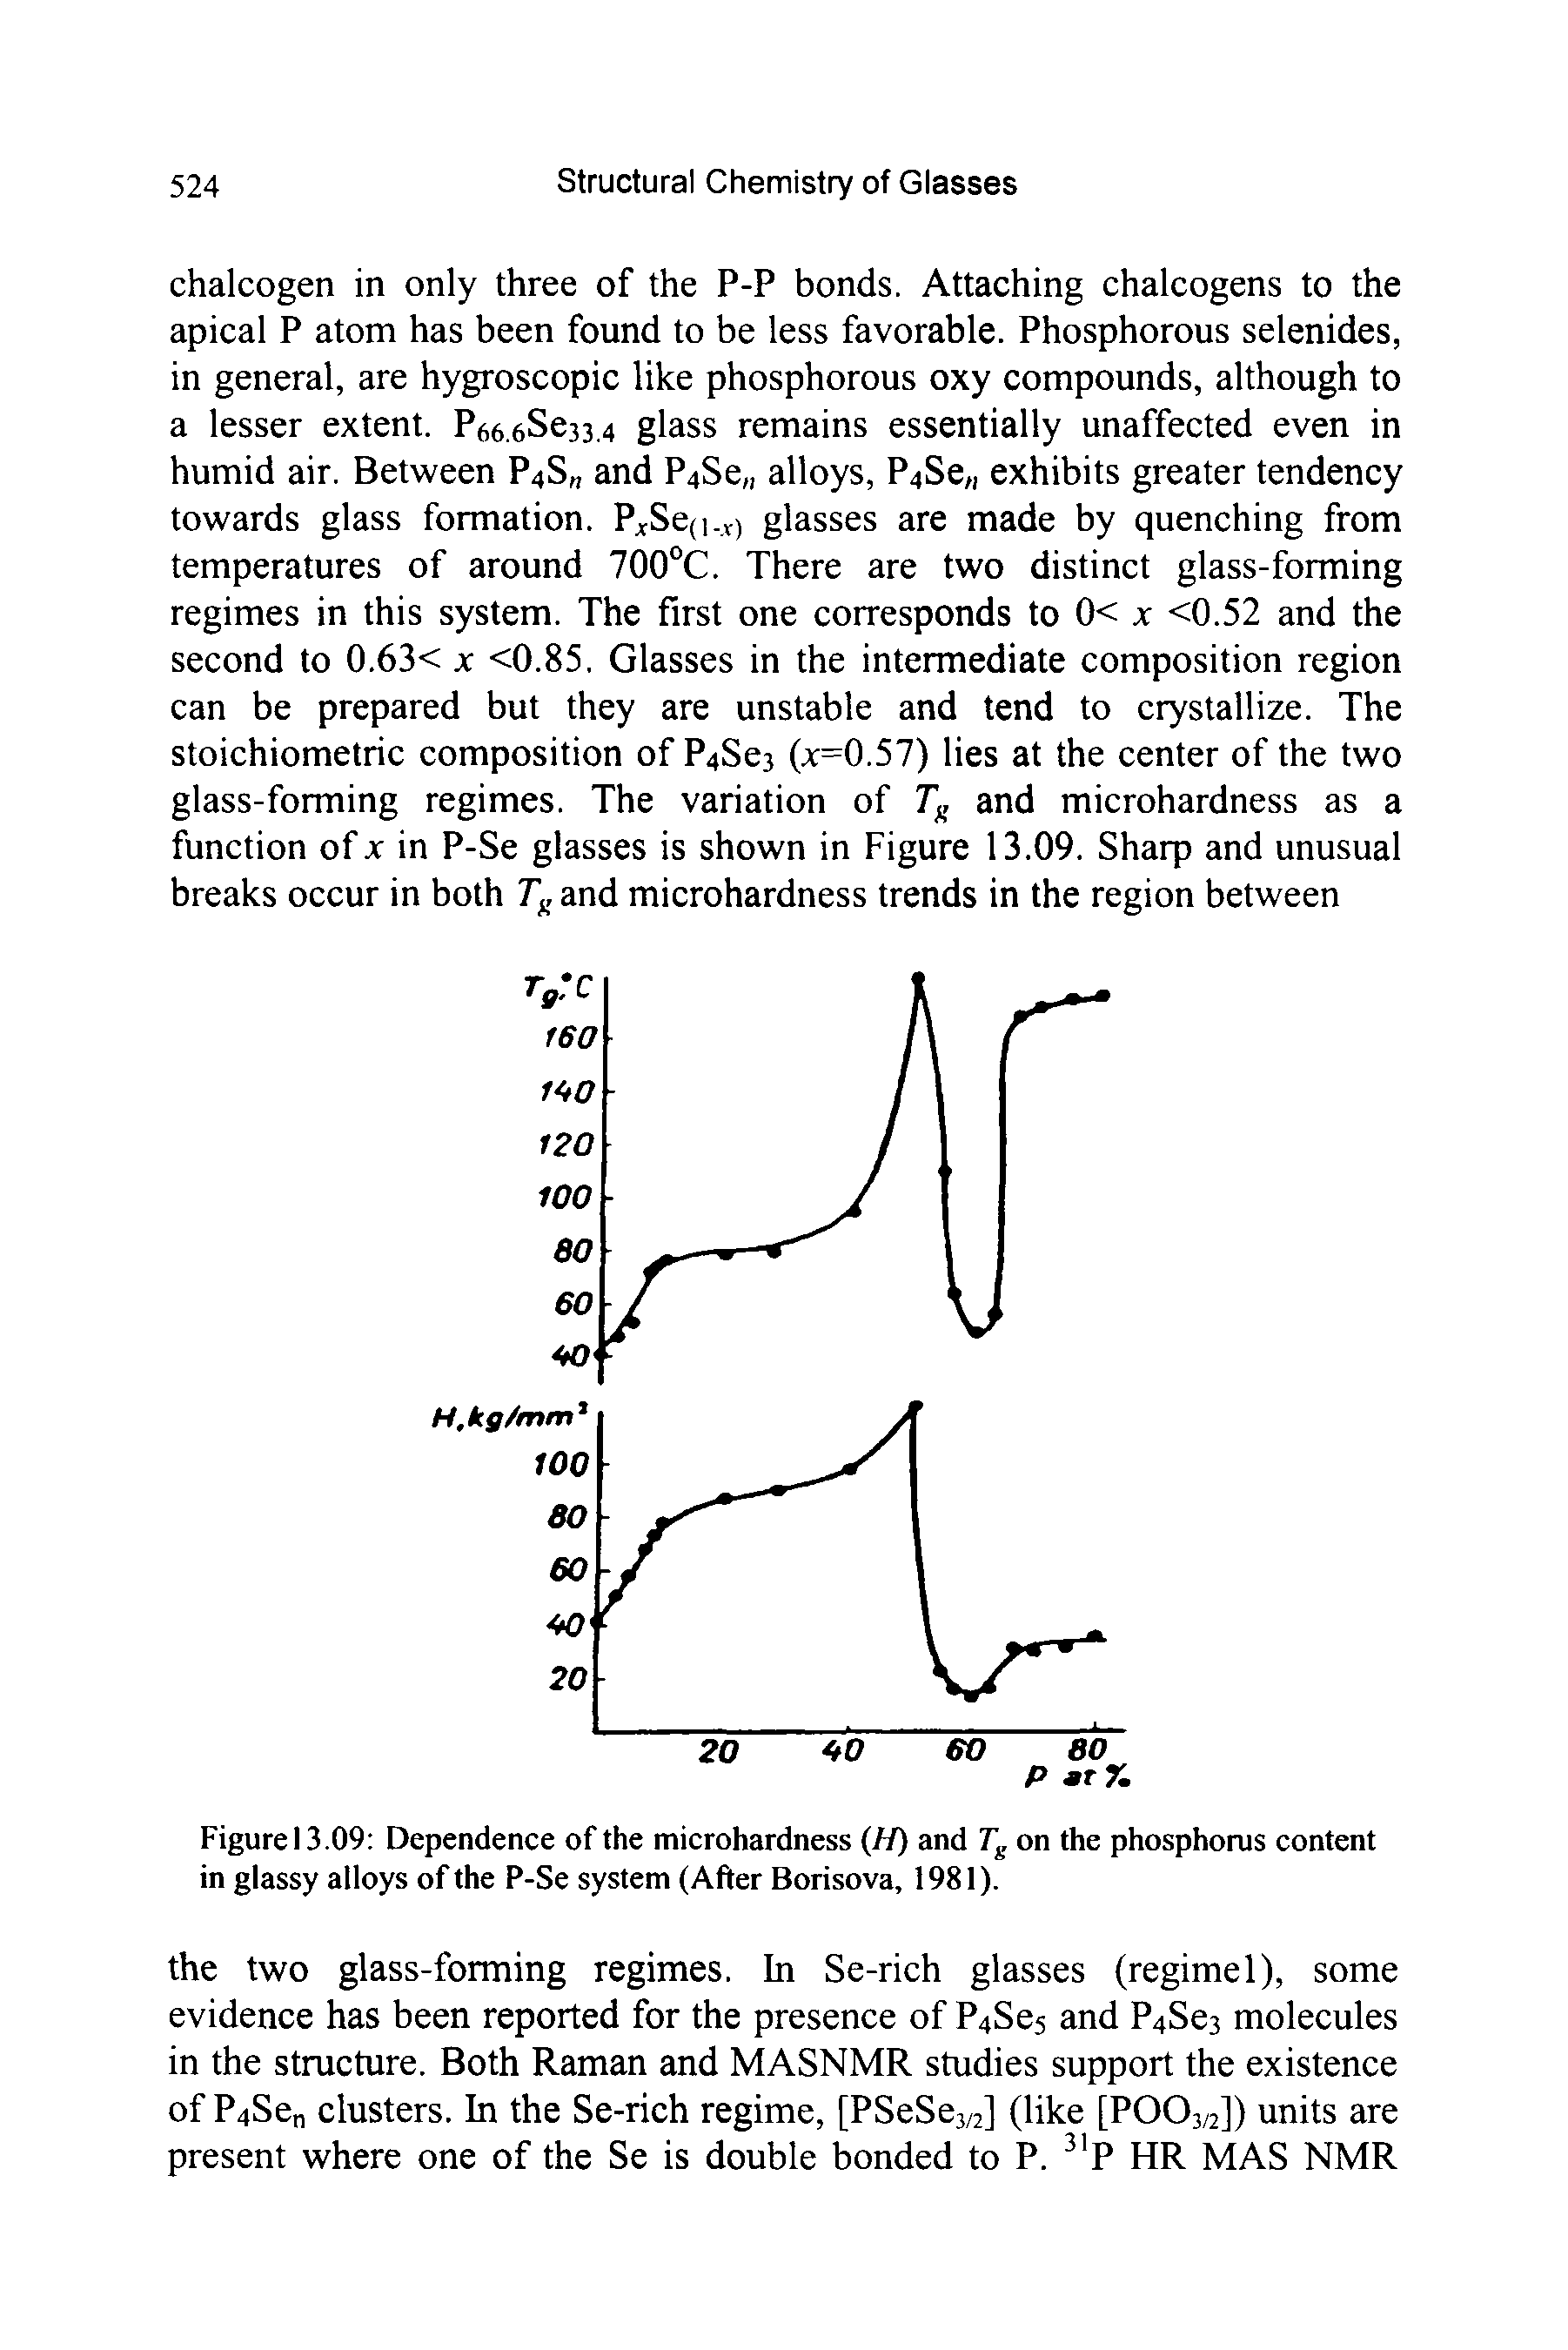 Figure 13.09 Dependence of the microhardness (//) and Tg on the phosphorus content in glassy alloys of the P-Se system (After Borisova, 1981).